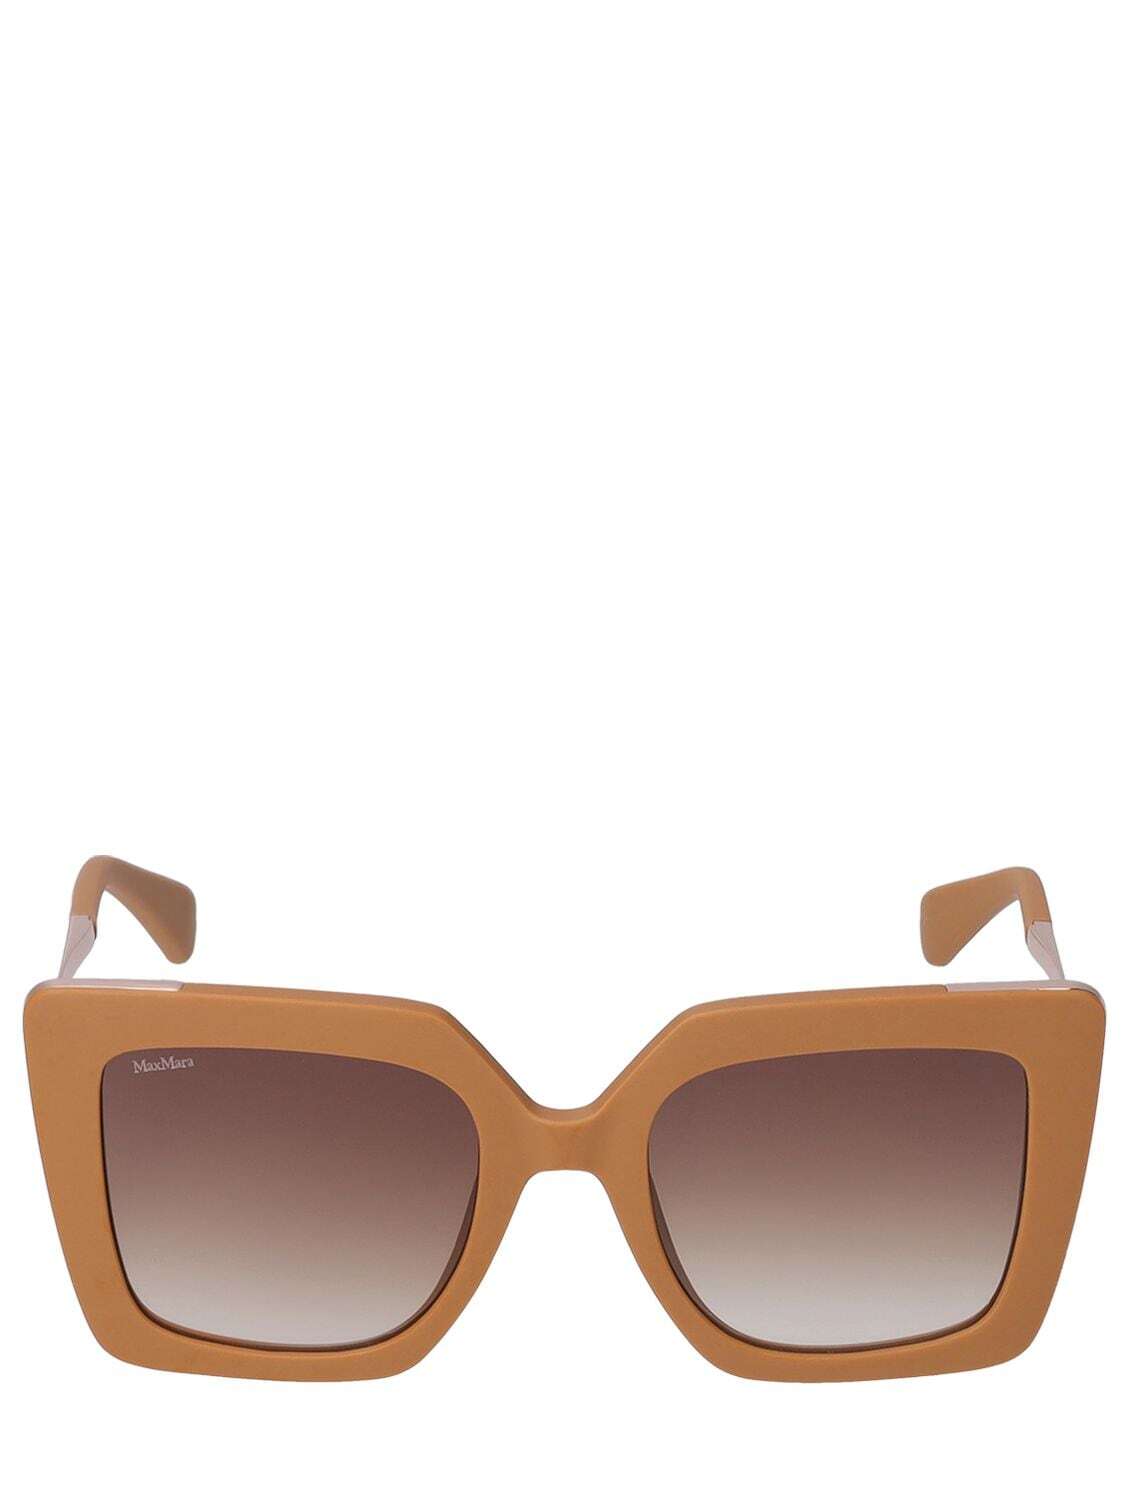 MAX MARA Design4 Butterfly Sunglasses in brown / pink